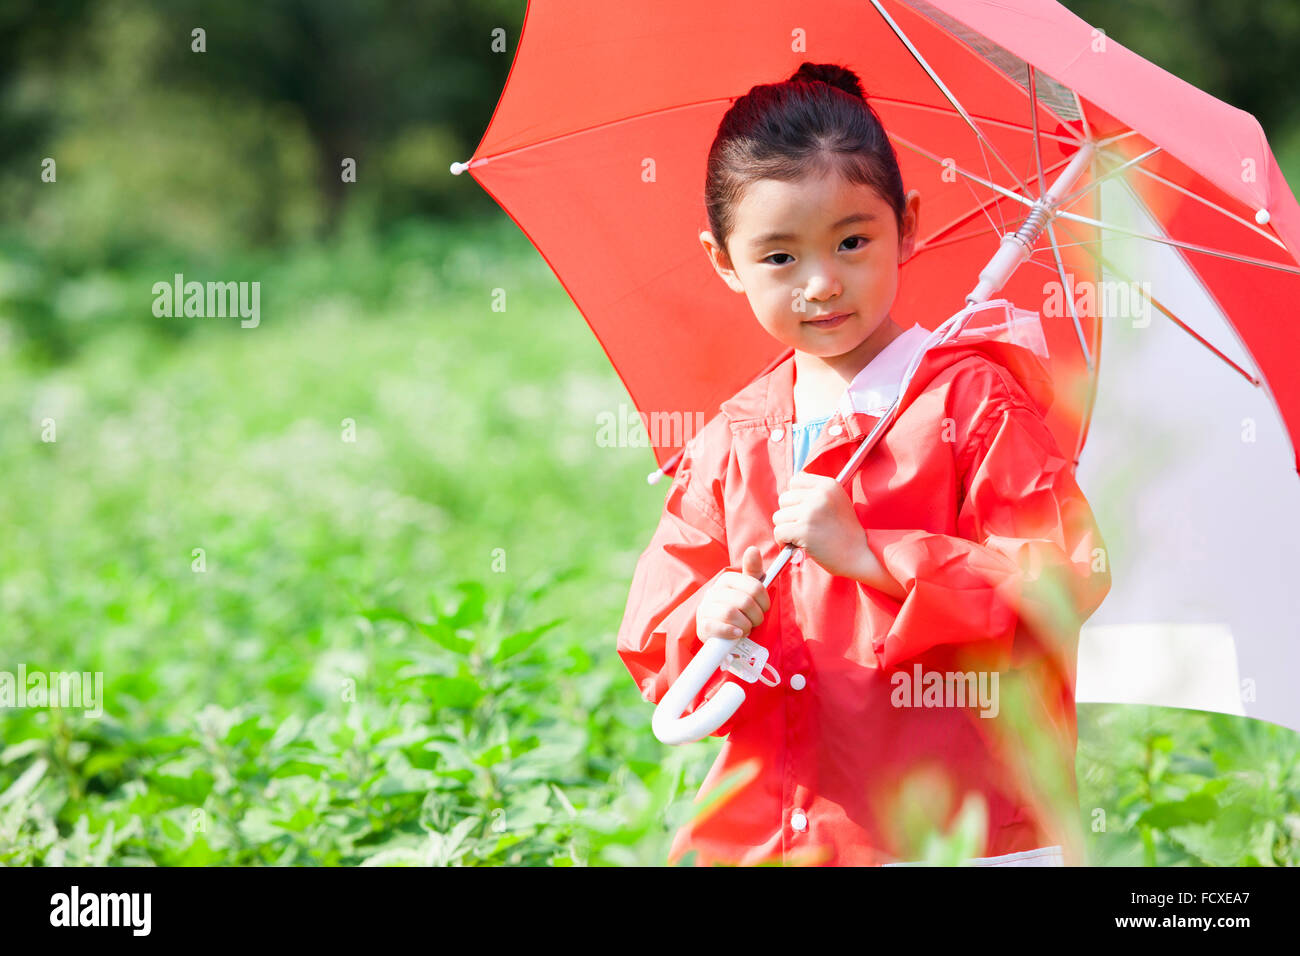 Girl in red rain coat under the red umbrella in the field Stock Photo